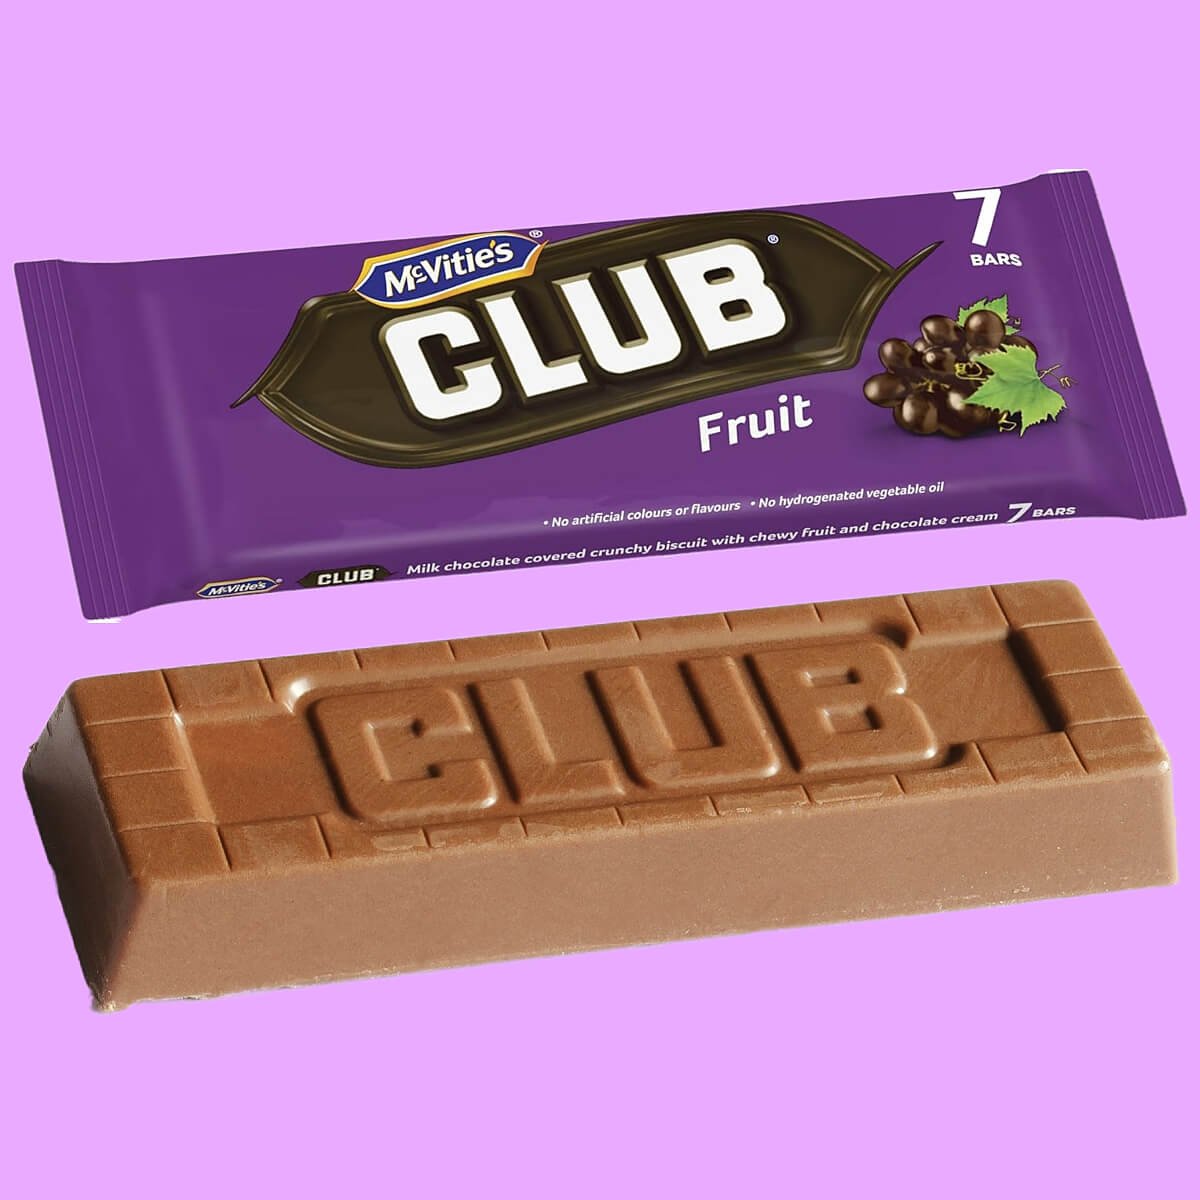 Where Can I Buy Fruit Club Biscuits?